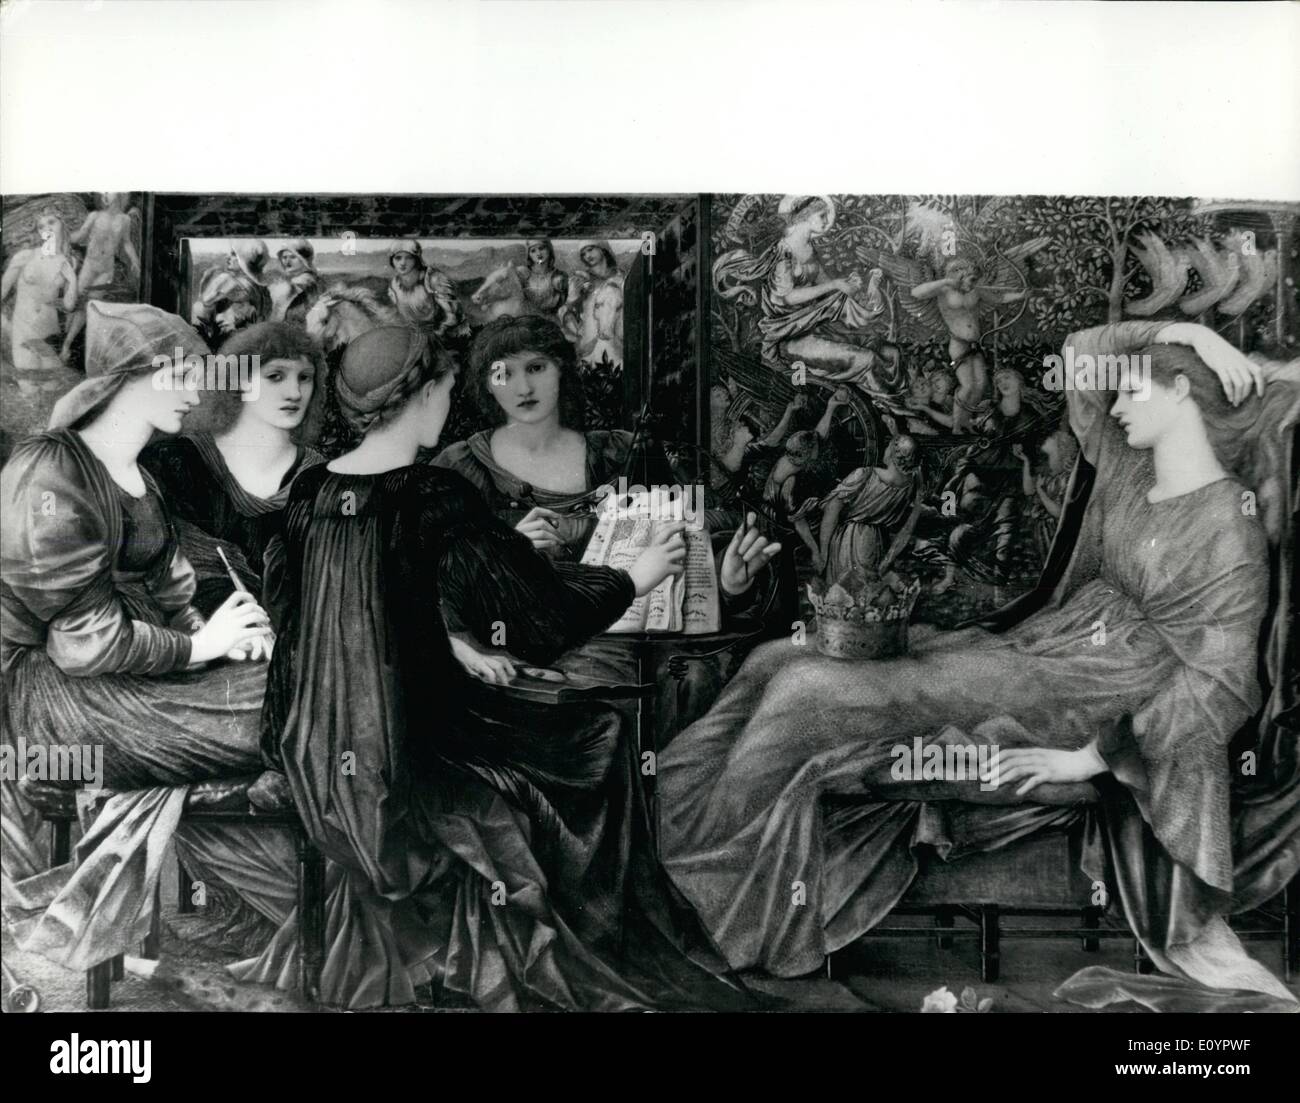 Mar. 03, 1971 - World record for a Burne Jokes; A record 33,000 was bid by the London, dealers A new at Sotheby's today for the Burne Jones ''laus Veneris. The paintings was last sold in 1957 to its previous owner Huntingdon Hurtford for 3,400. The previous record for a Burne Jones was a mere 5,775 which was established in 1895, Photo Shiows The burne jones painting ''Laus Venerie' Stock Photo